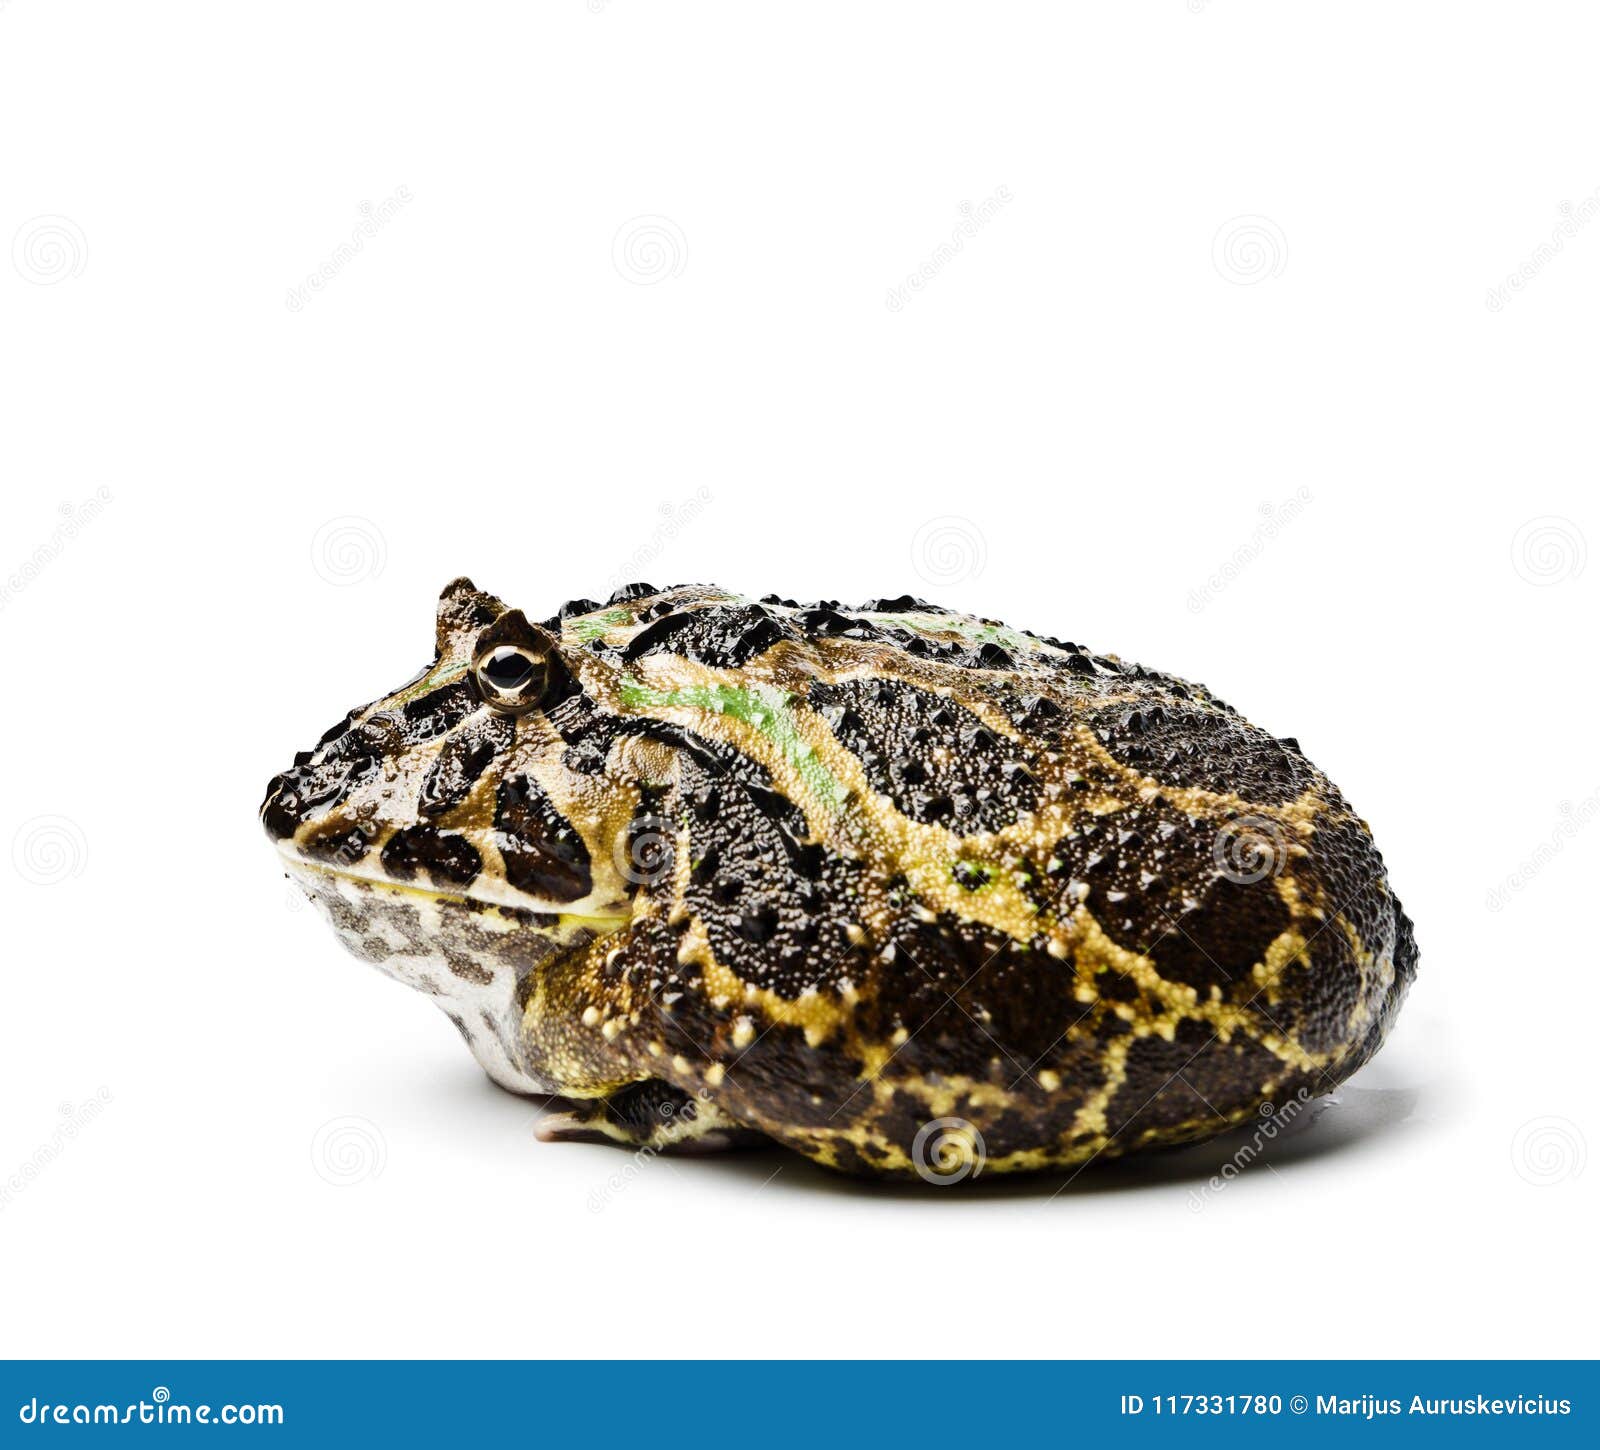 chacoan horned frog. ceratophrys cranwelli.